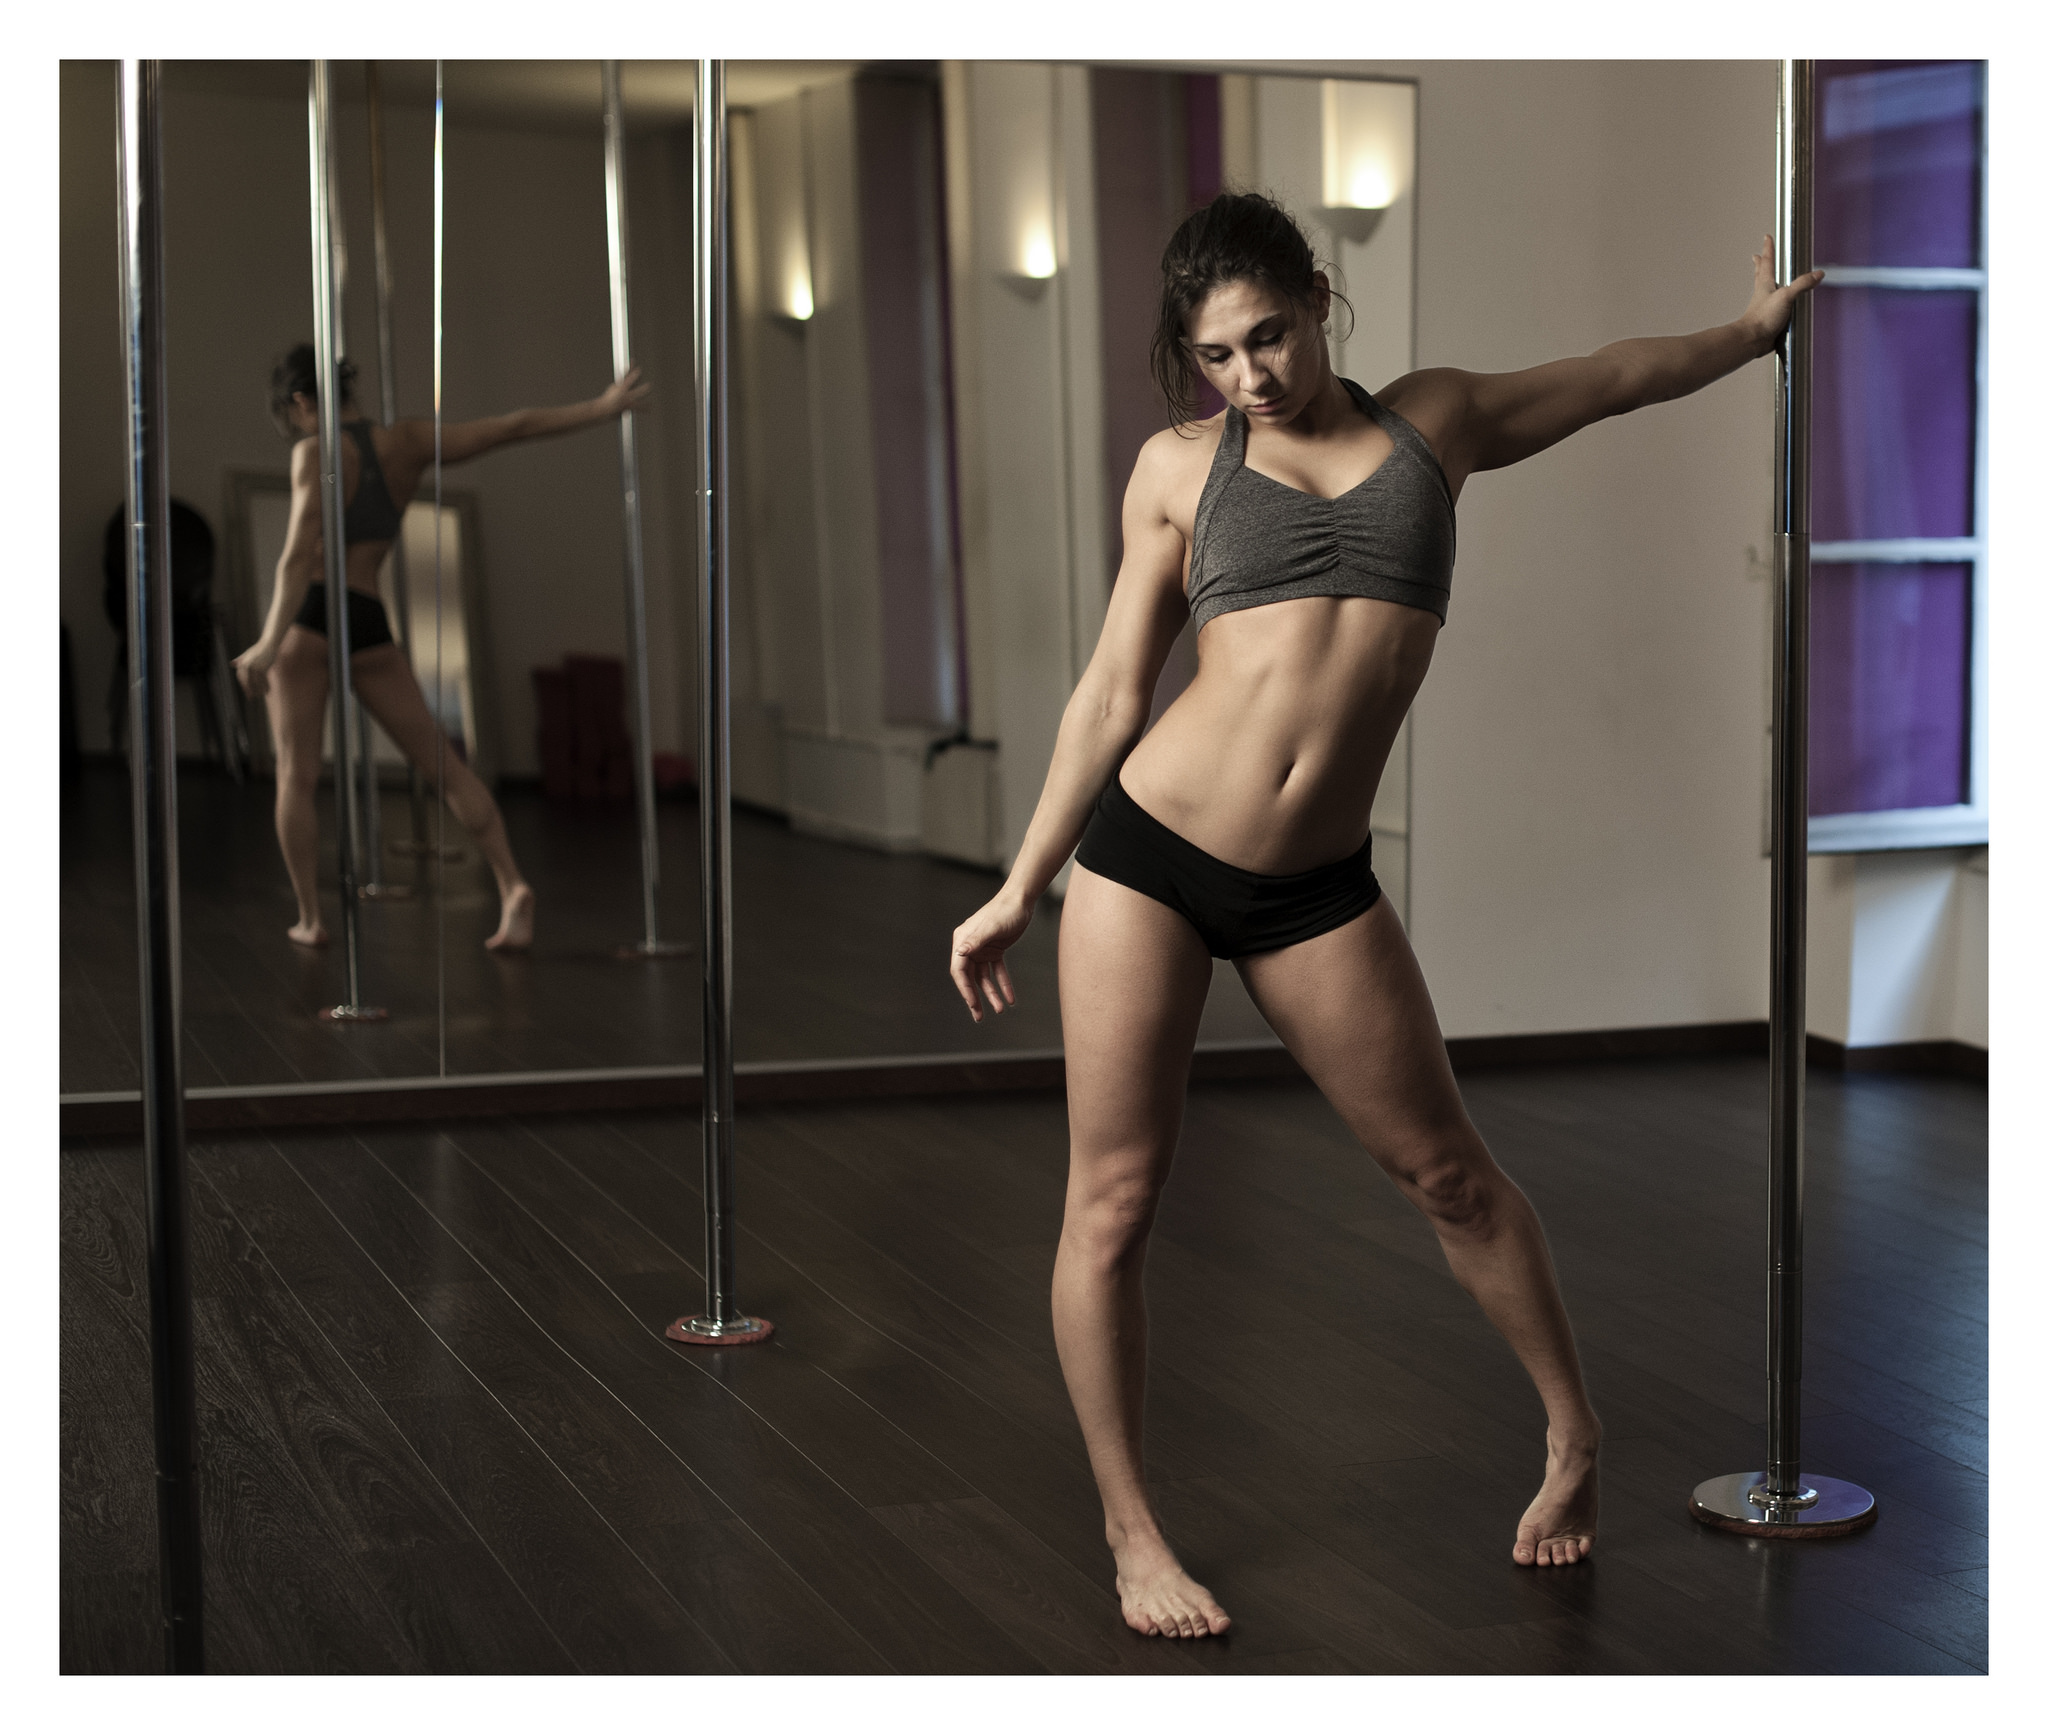 Pole dancing: Ageism, skilfulness and finding sexiness in sport